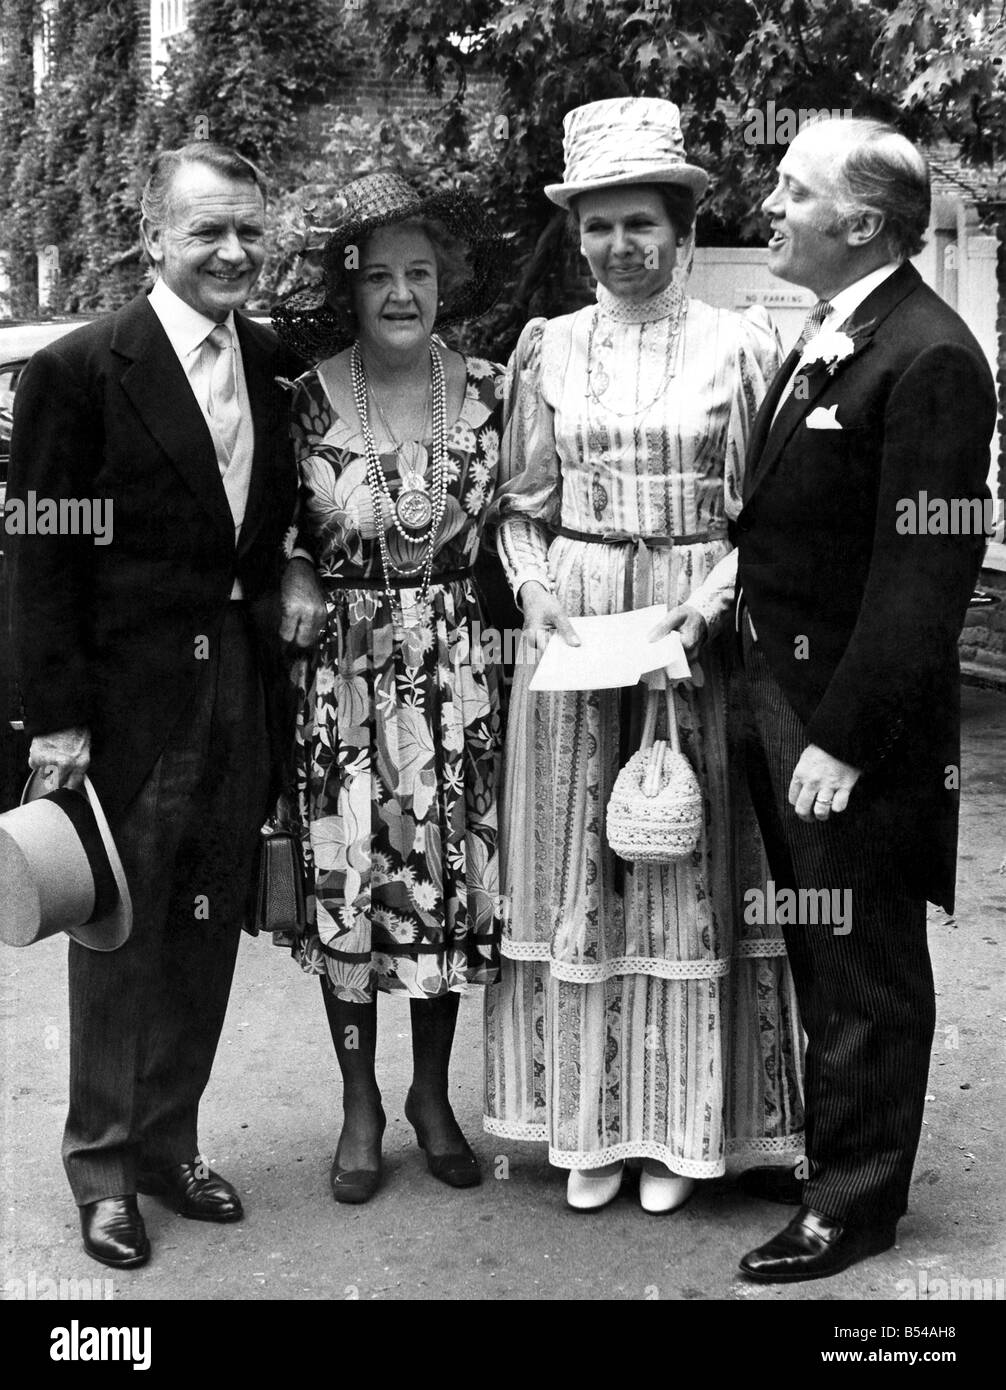 There was a star-studded cast of guests at Denham, Buckinghamshire, on Saturday (10-7-71) when Michael Attenborough married 20-year-old Joyce Frankenberg - better known as actress Jane Seymour. At the picturesque little parish church were Michael's parents, actor Richard Attenborough and actress Sylvia Sims, actor John Mills and his wife, authoress Mary Hayley Bell, and actor Jack Hawkins. Arriving for the wedding - (from left) John Mills and Mary Hayley Bell, Sylvia Sims and Richard Attenborough. ;July 1971 ;P016942 Stock Photo